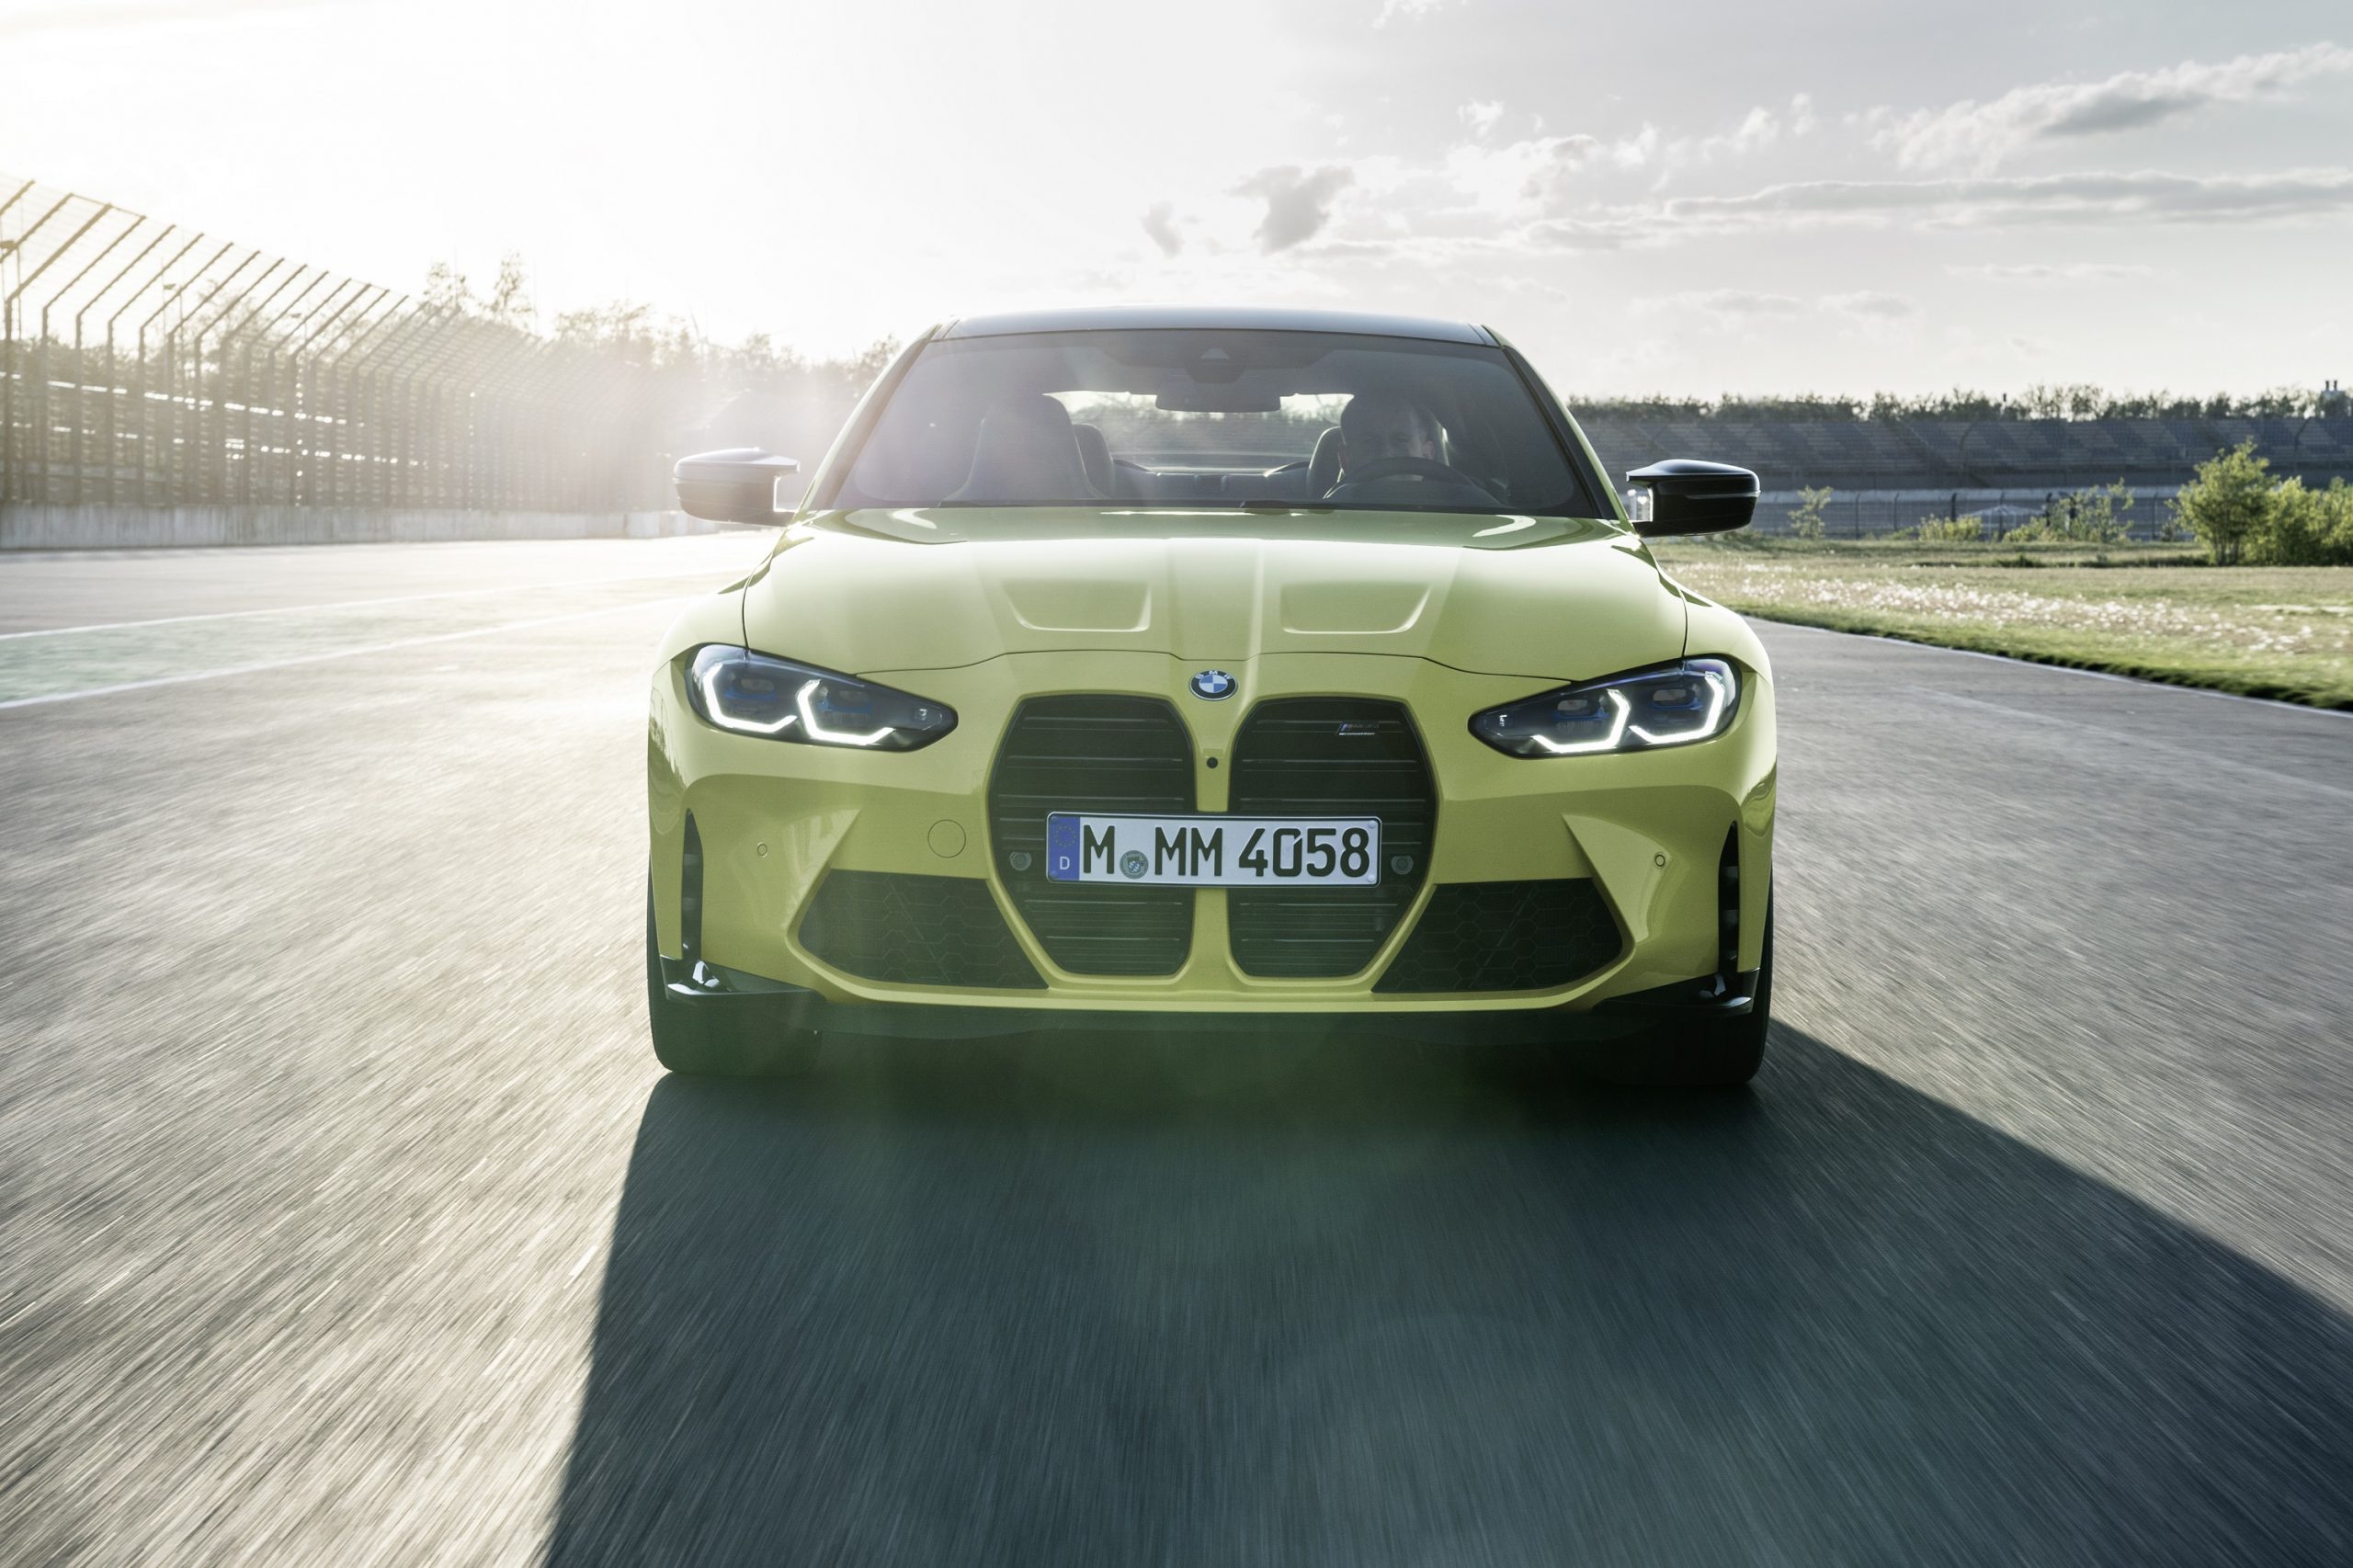 The 2021 BMW M4 kidney grille shot from the front on a racetrack